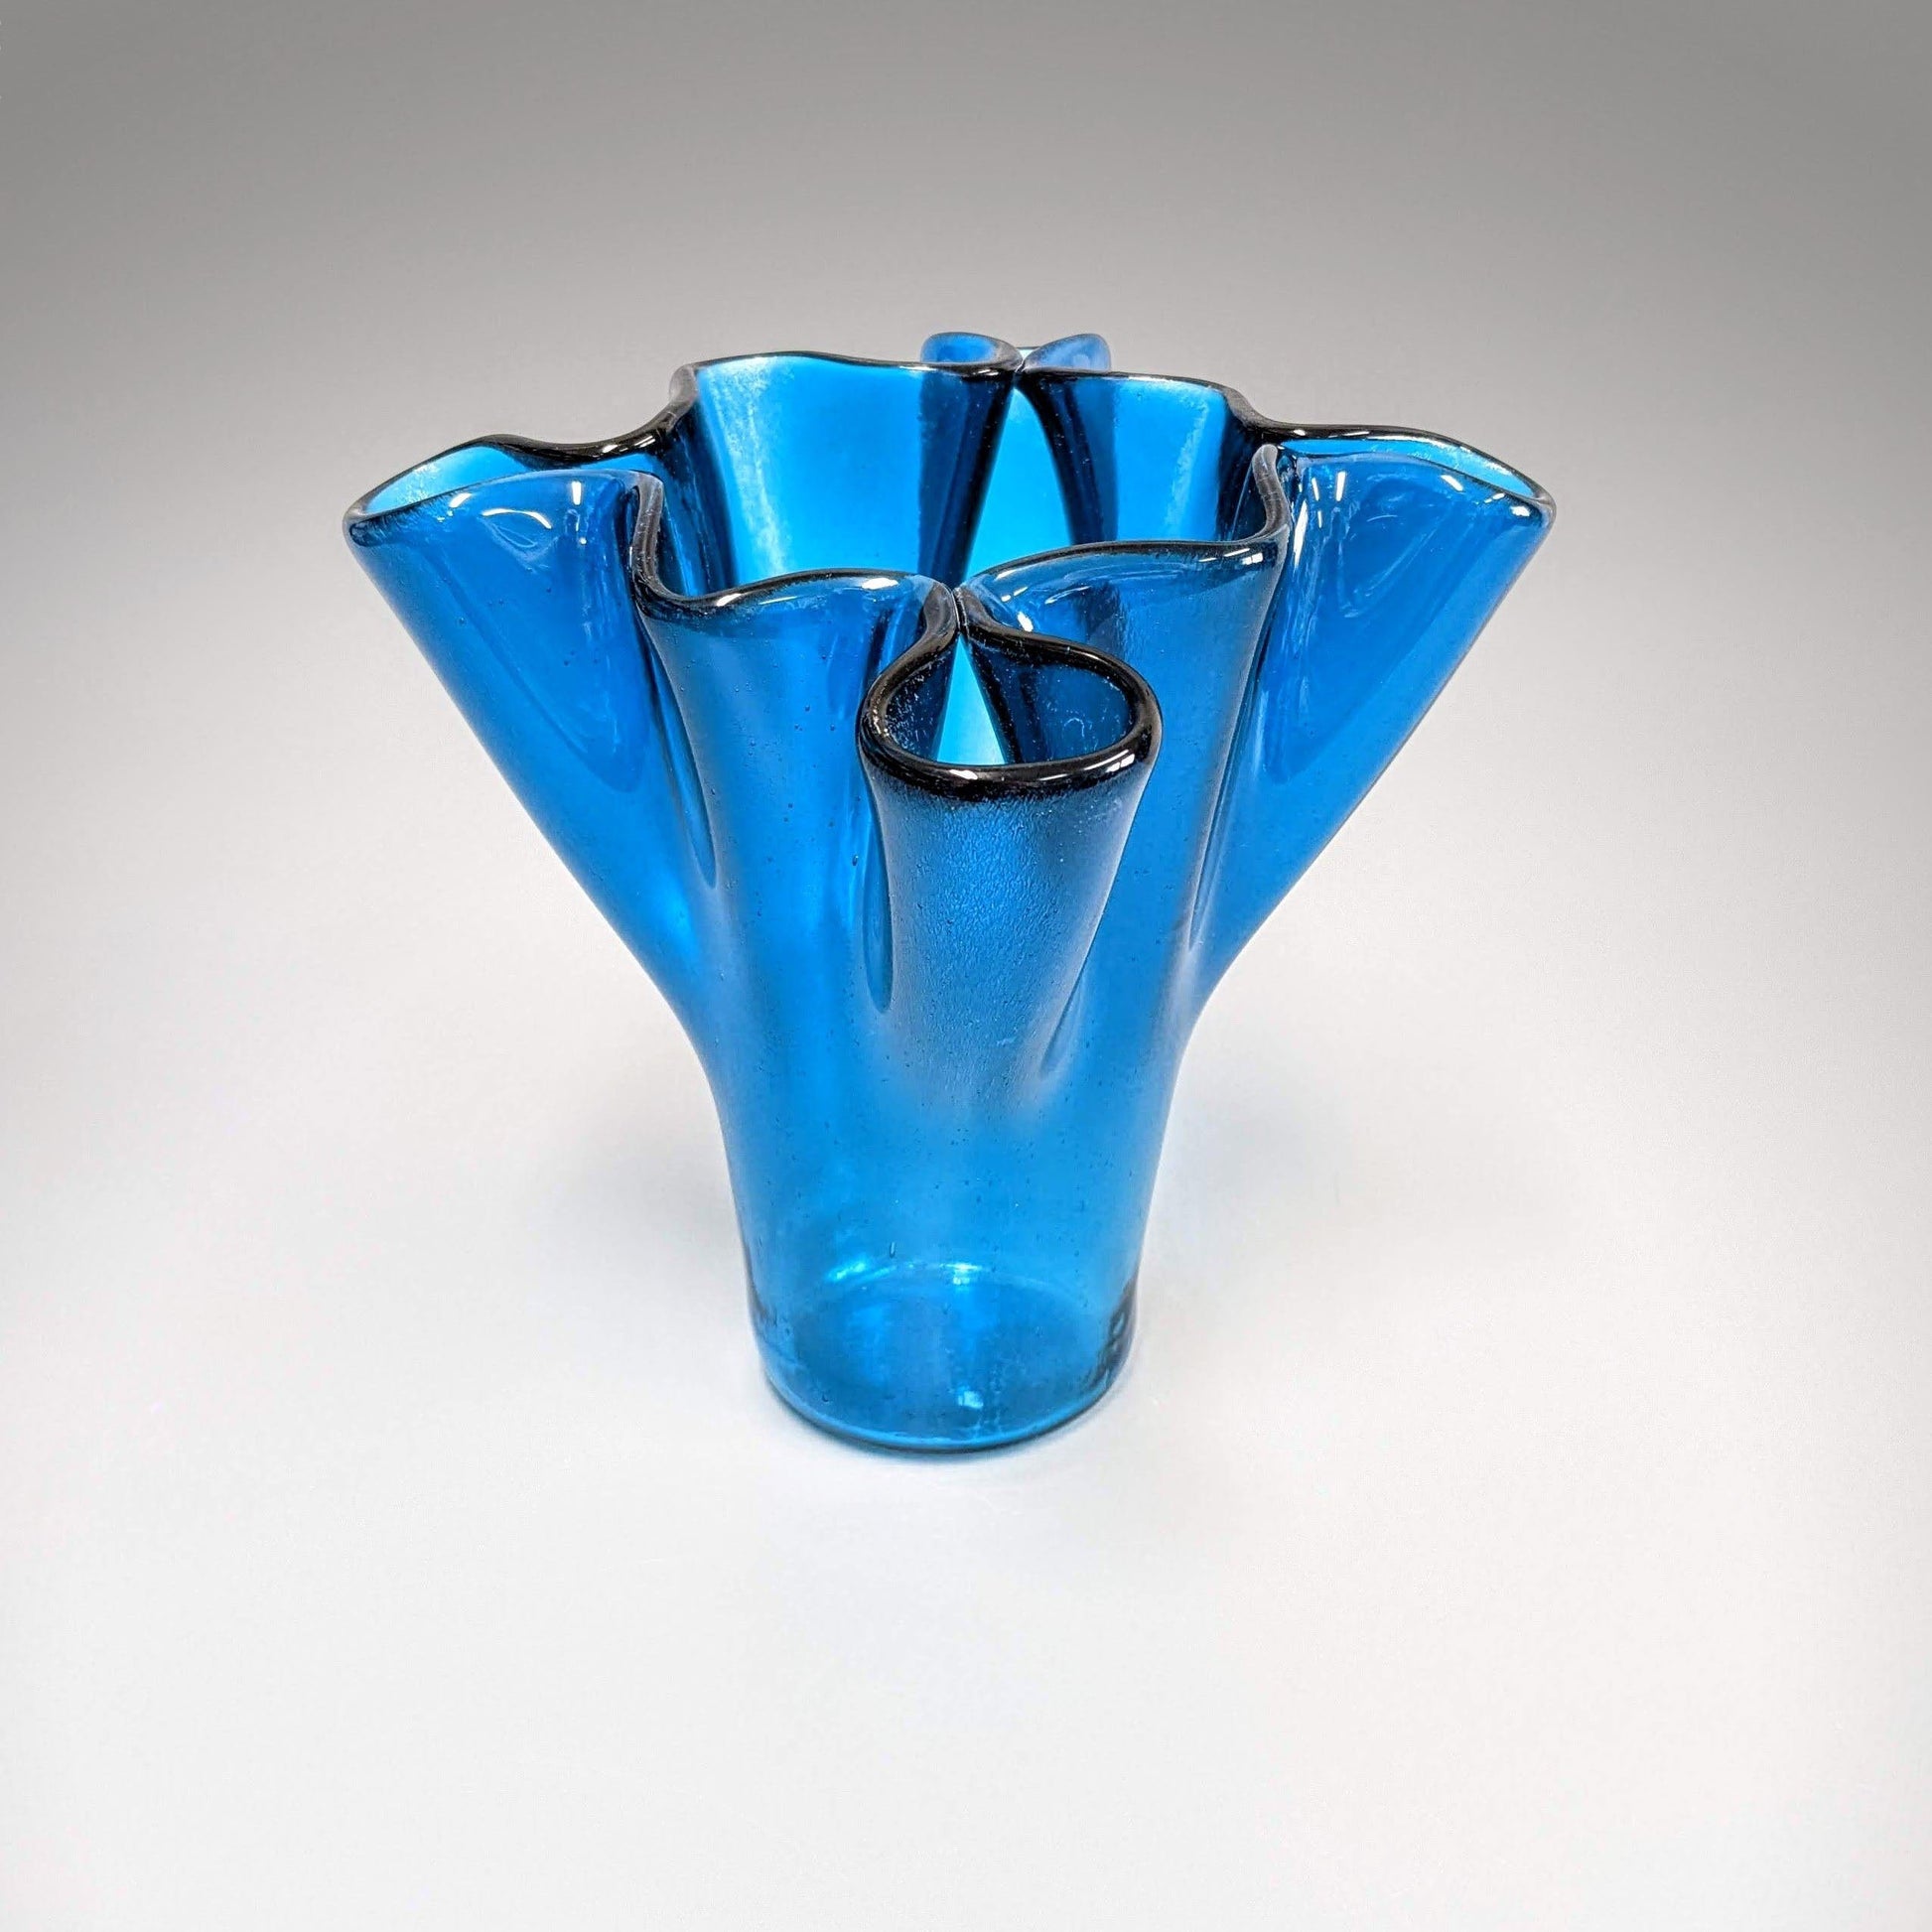 Glass Art Vase in Turquoise Blue | Unique Home Décor and Gift Ideas | The Glass Rainbow